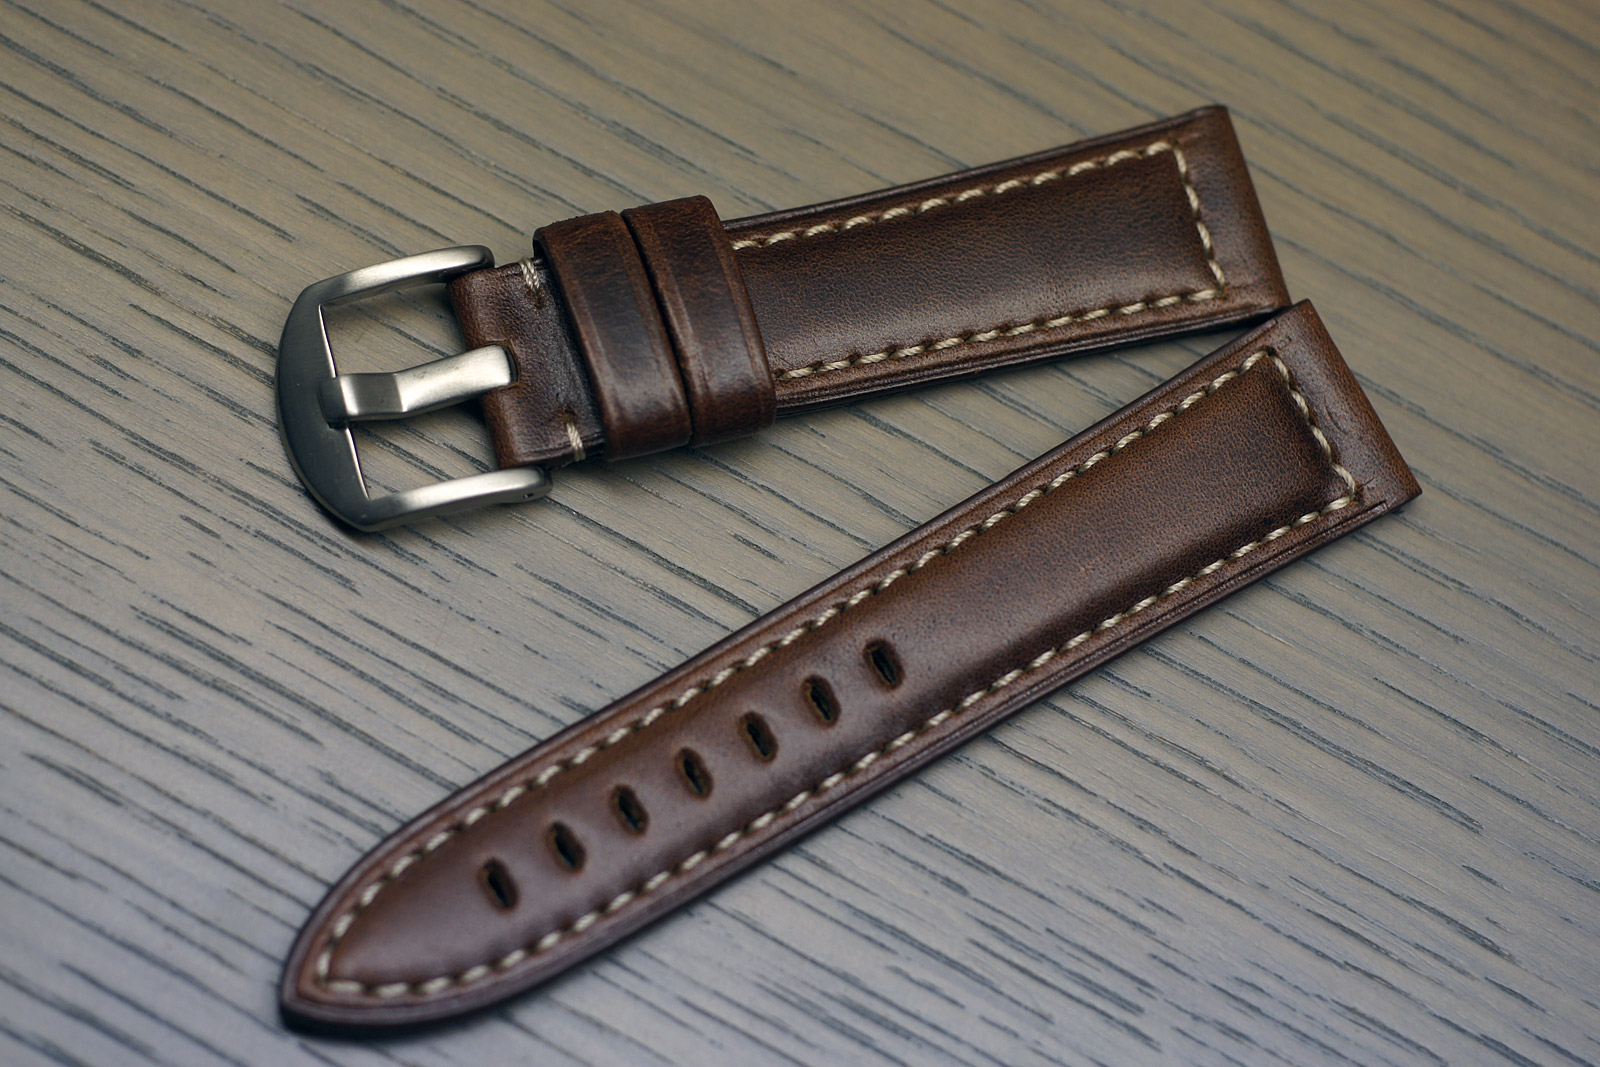 Strapaholics! | Information Site for Watch Strap Collectors! News ...